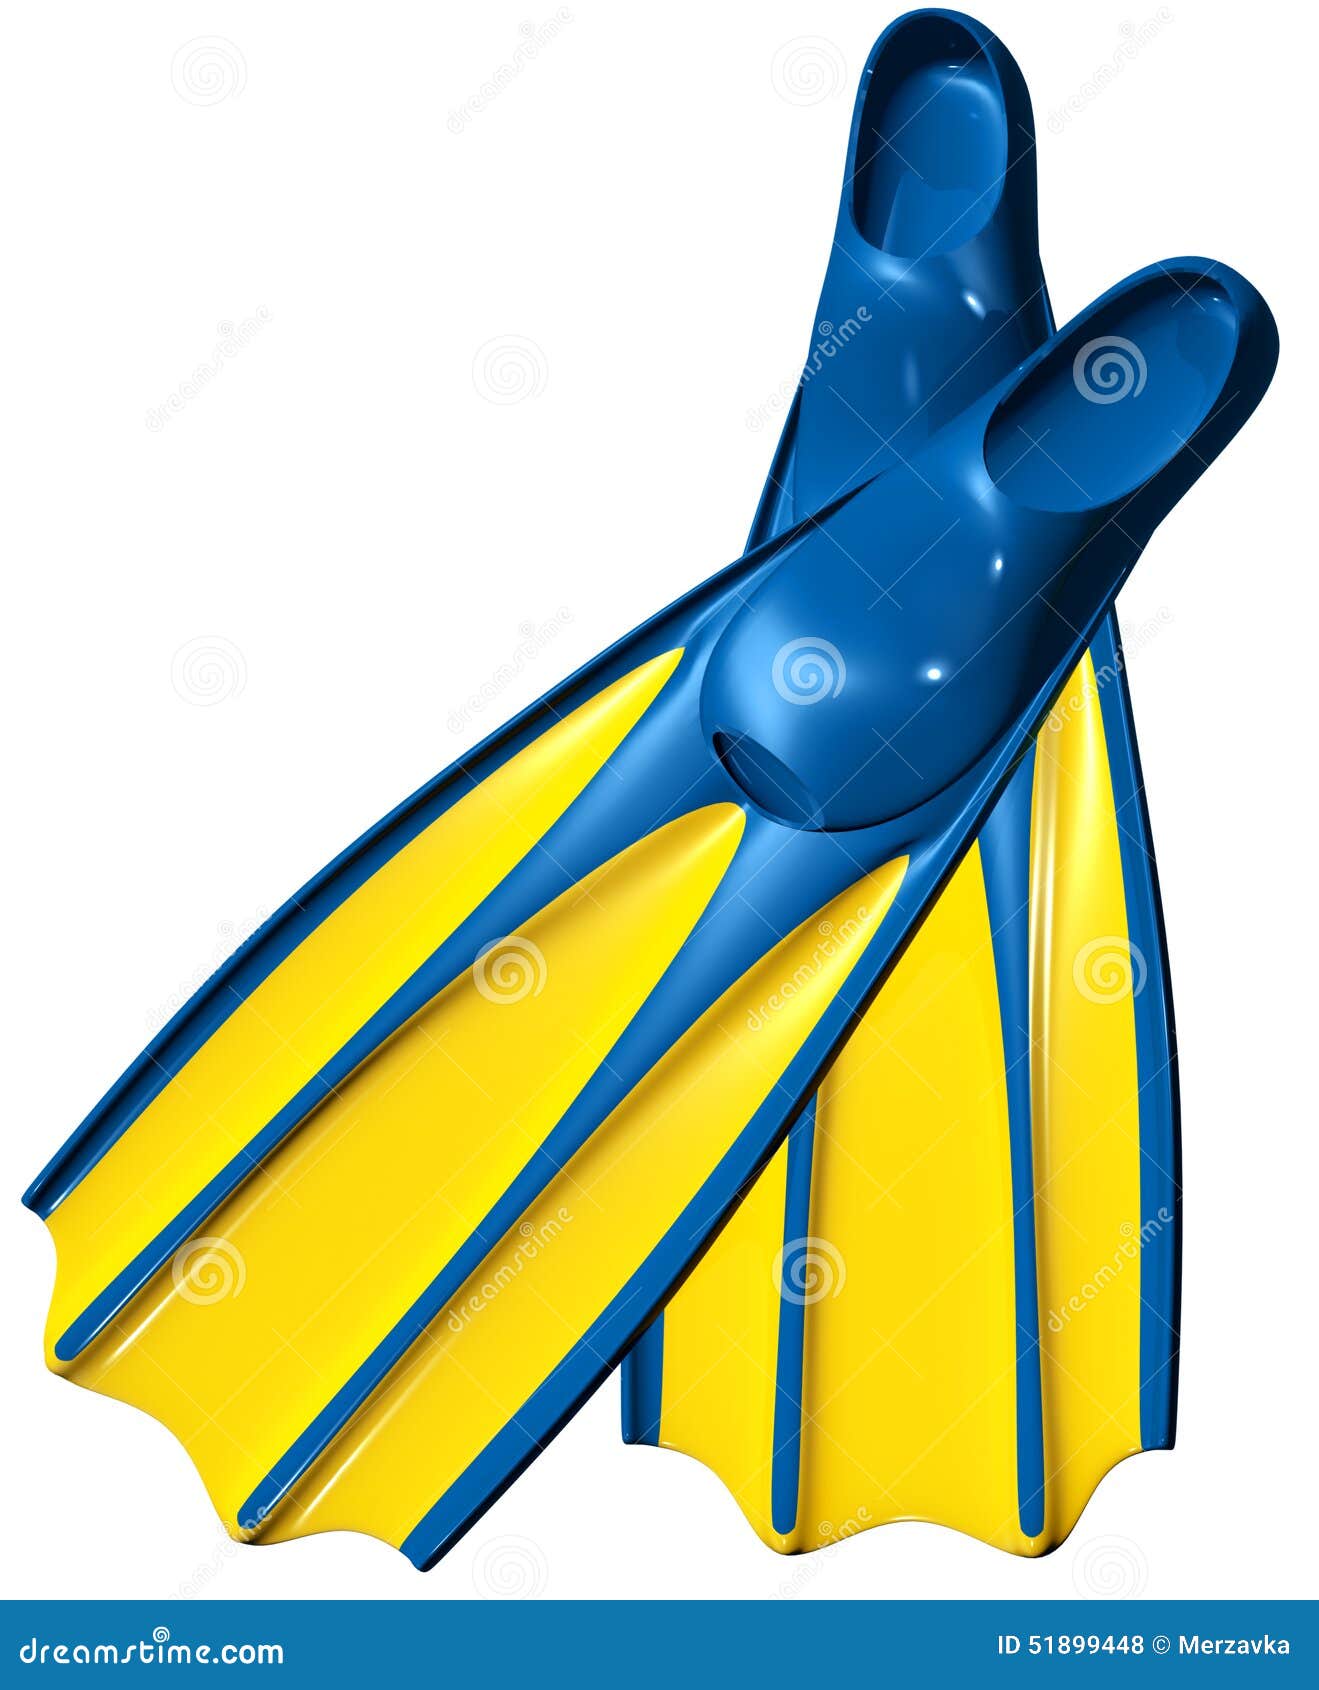 swim fins with blue rubber and yellow plastic